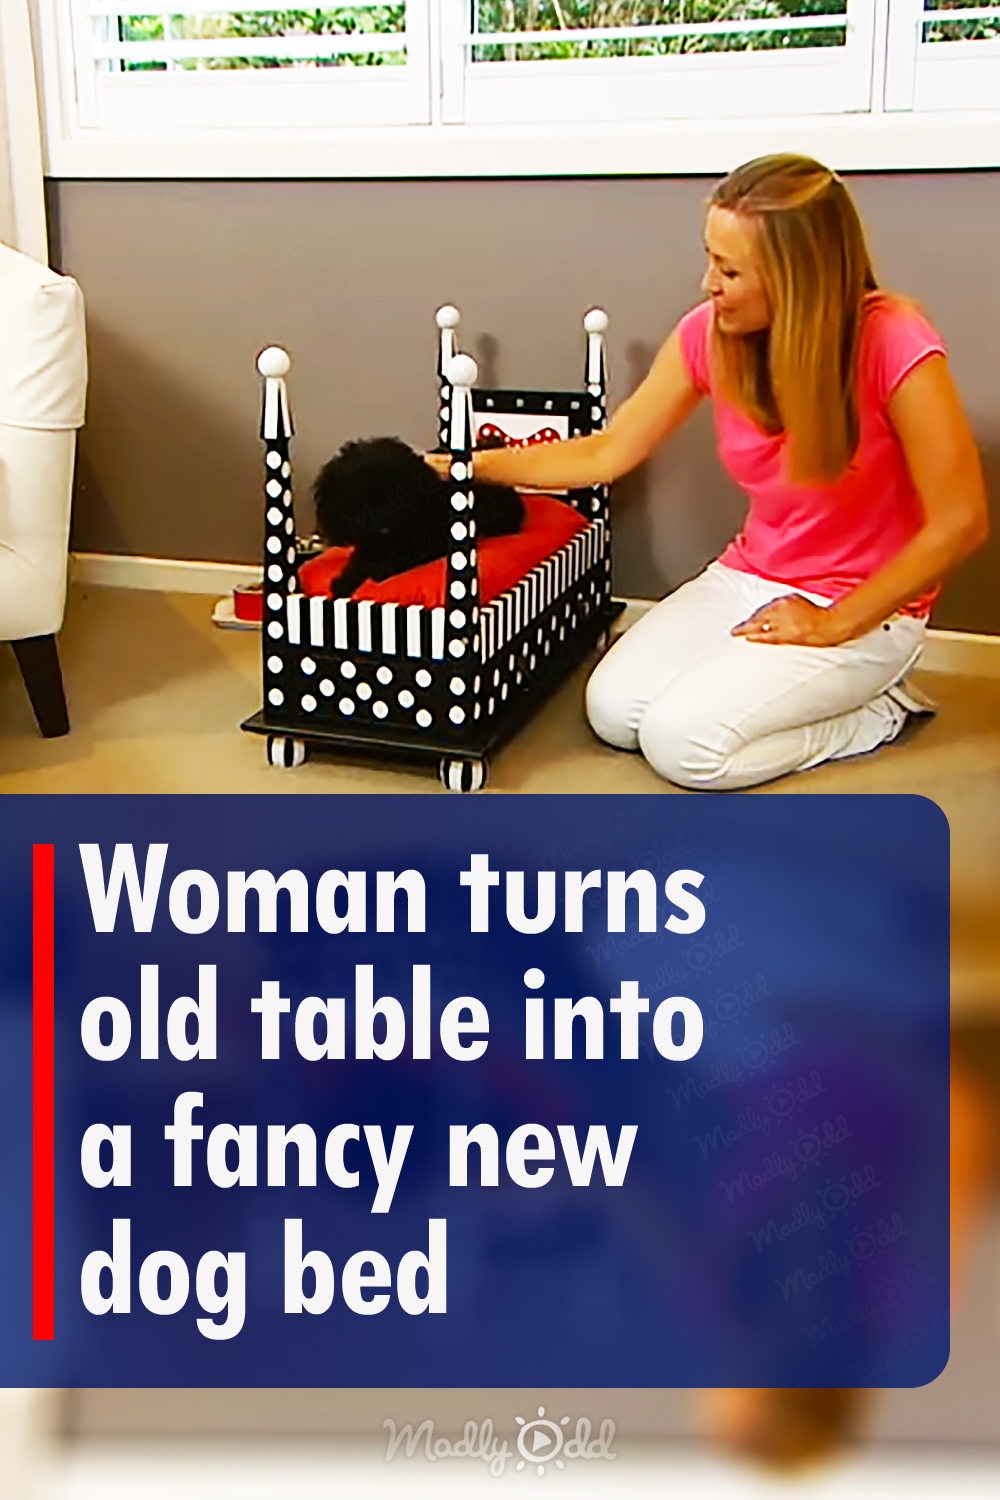 Woman turns old table into a fancy new dog bed